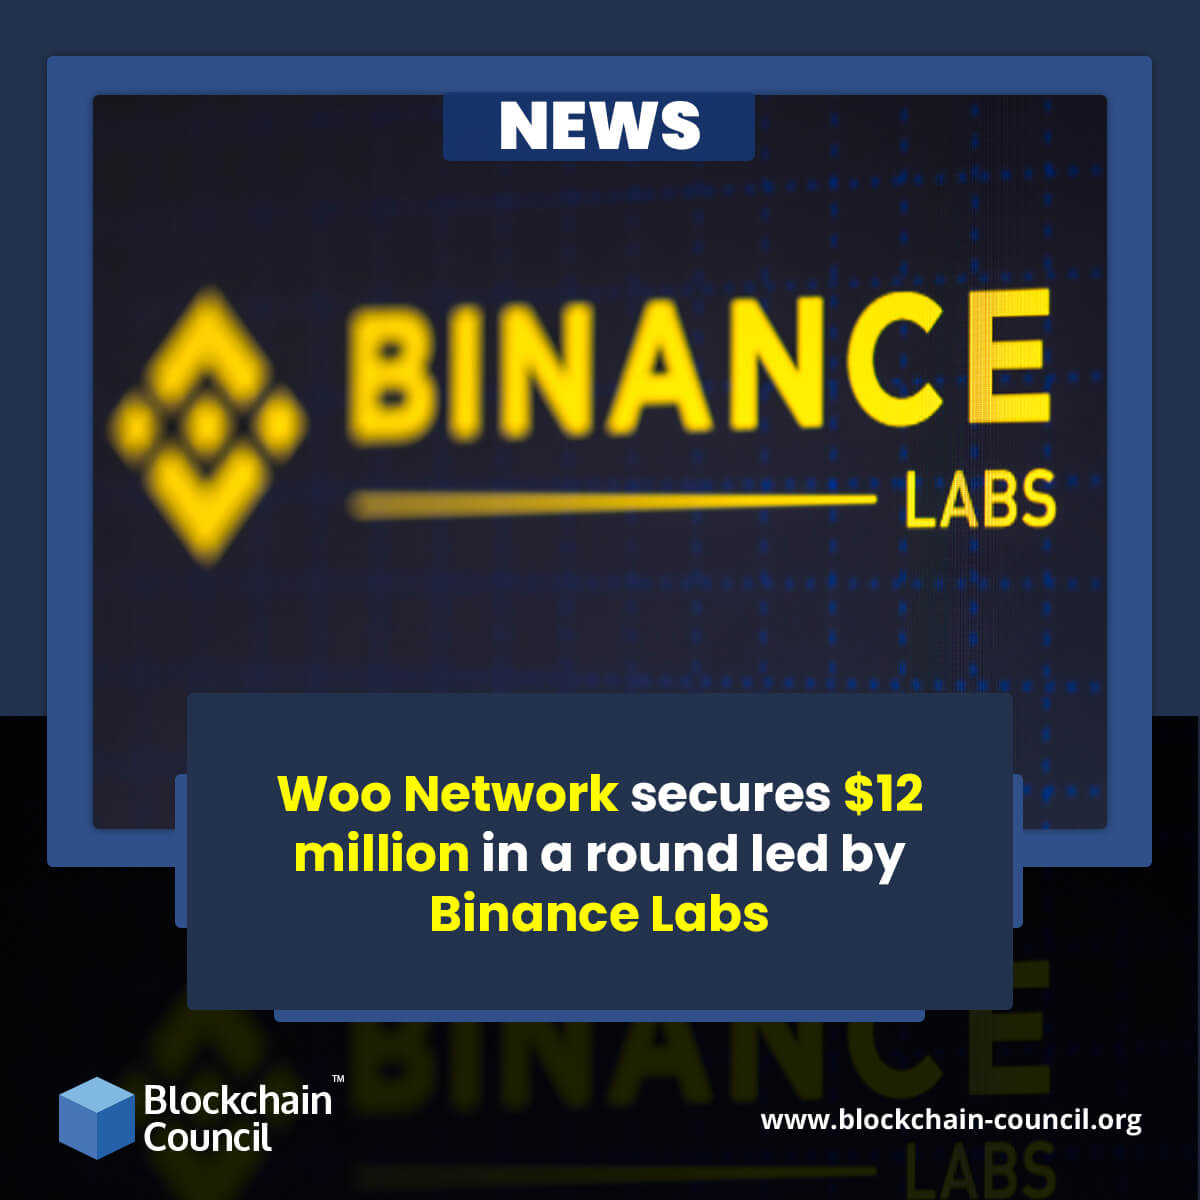 Woo Network secures $12 million in a round led by Binance Labs